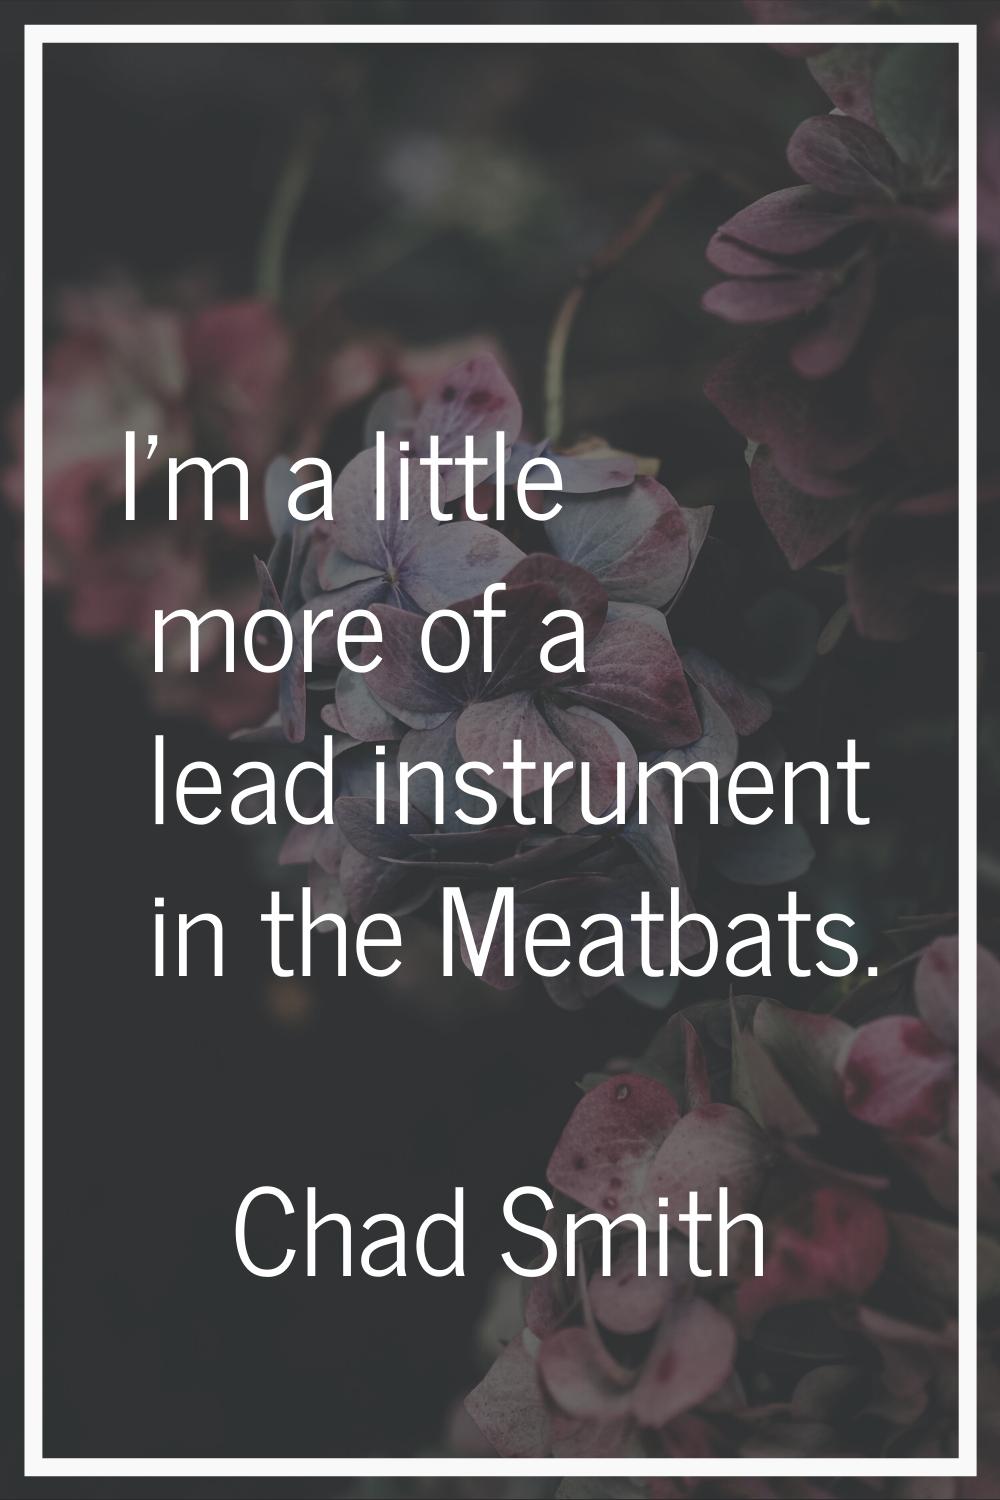 I'm a little more of a lead instrument in the Meatbats.